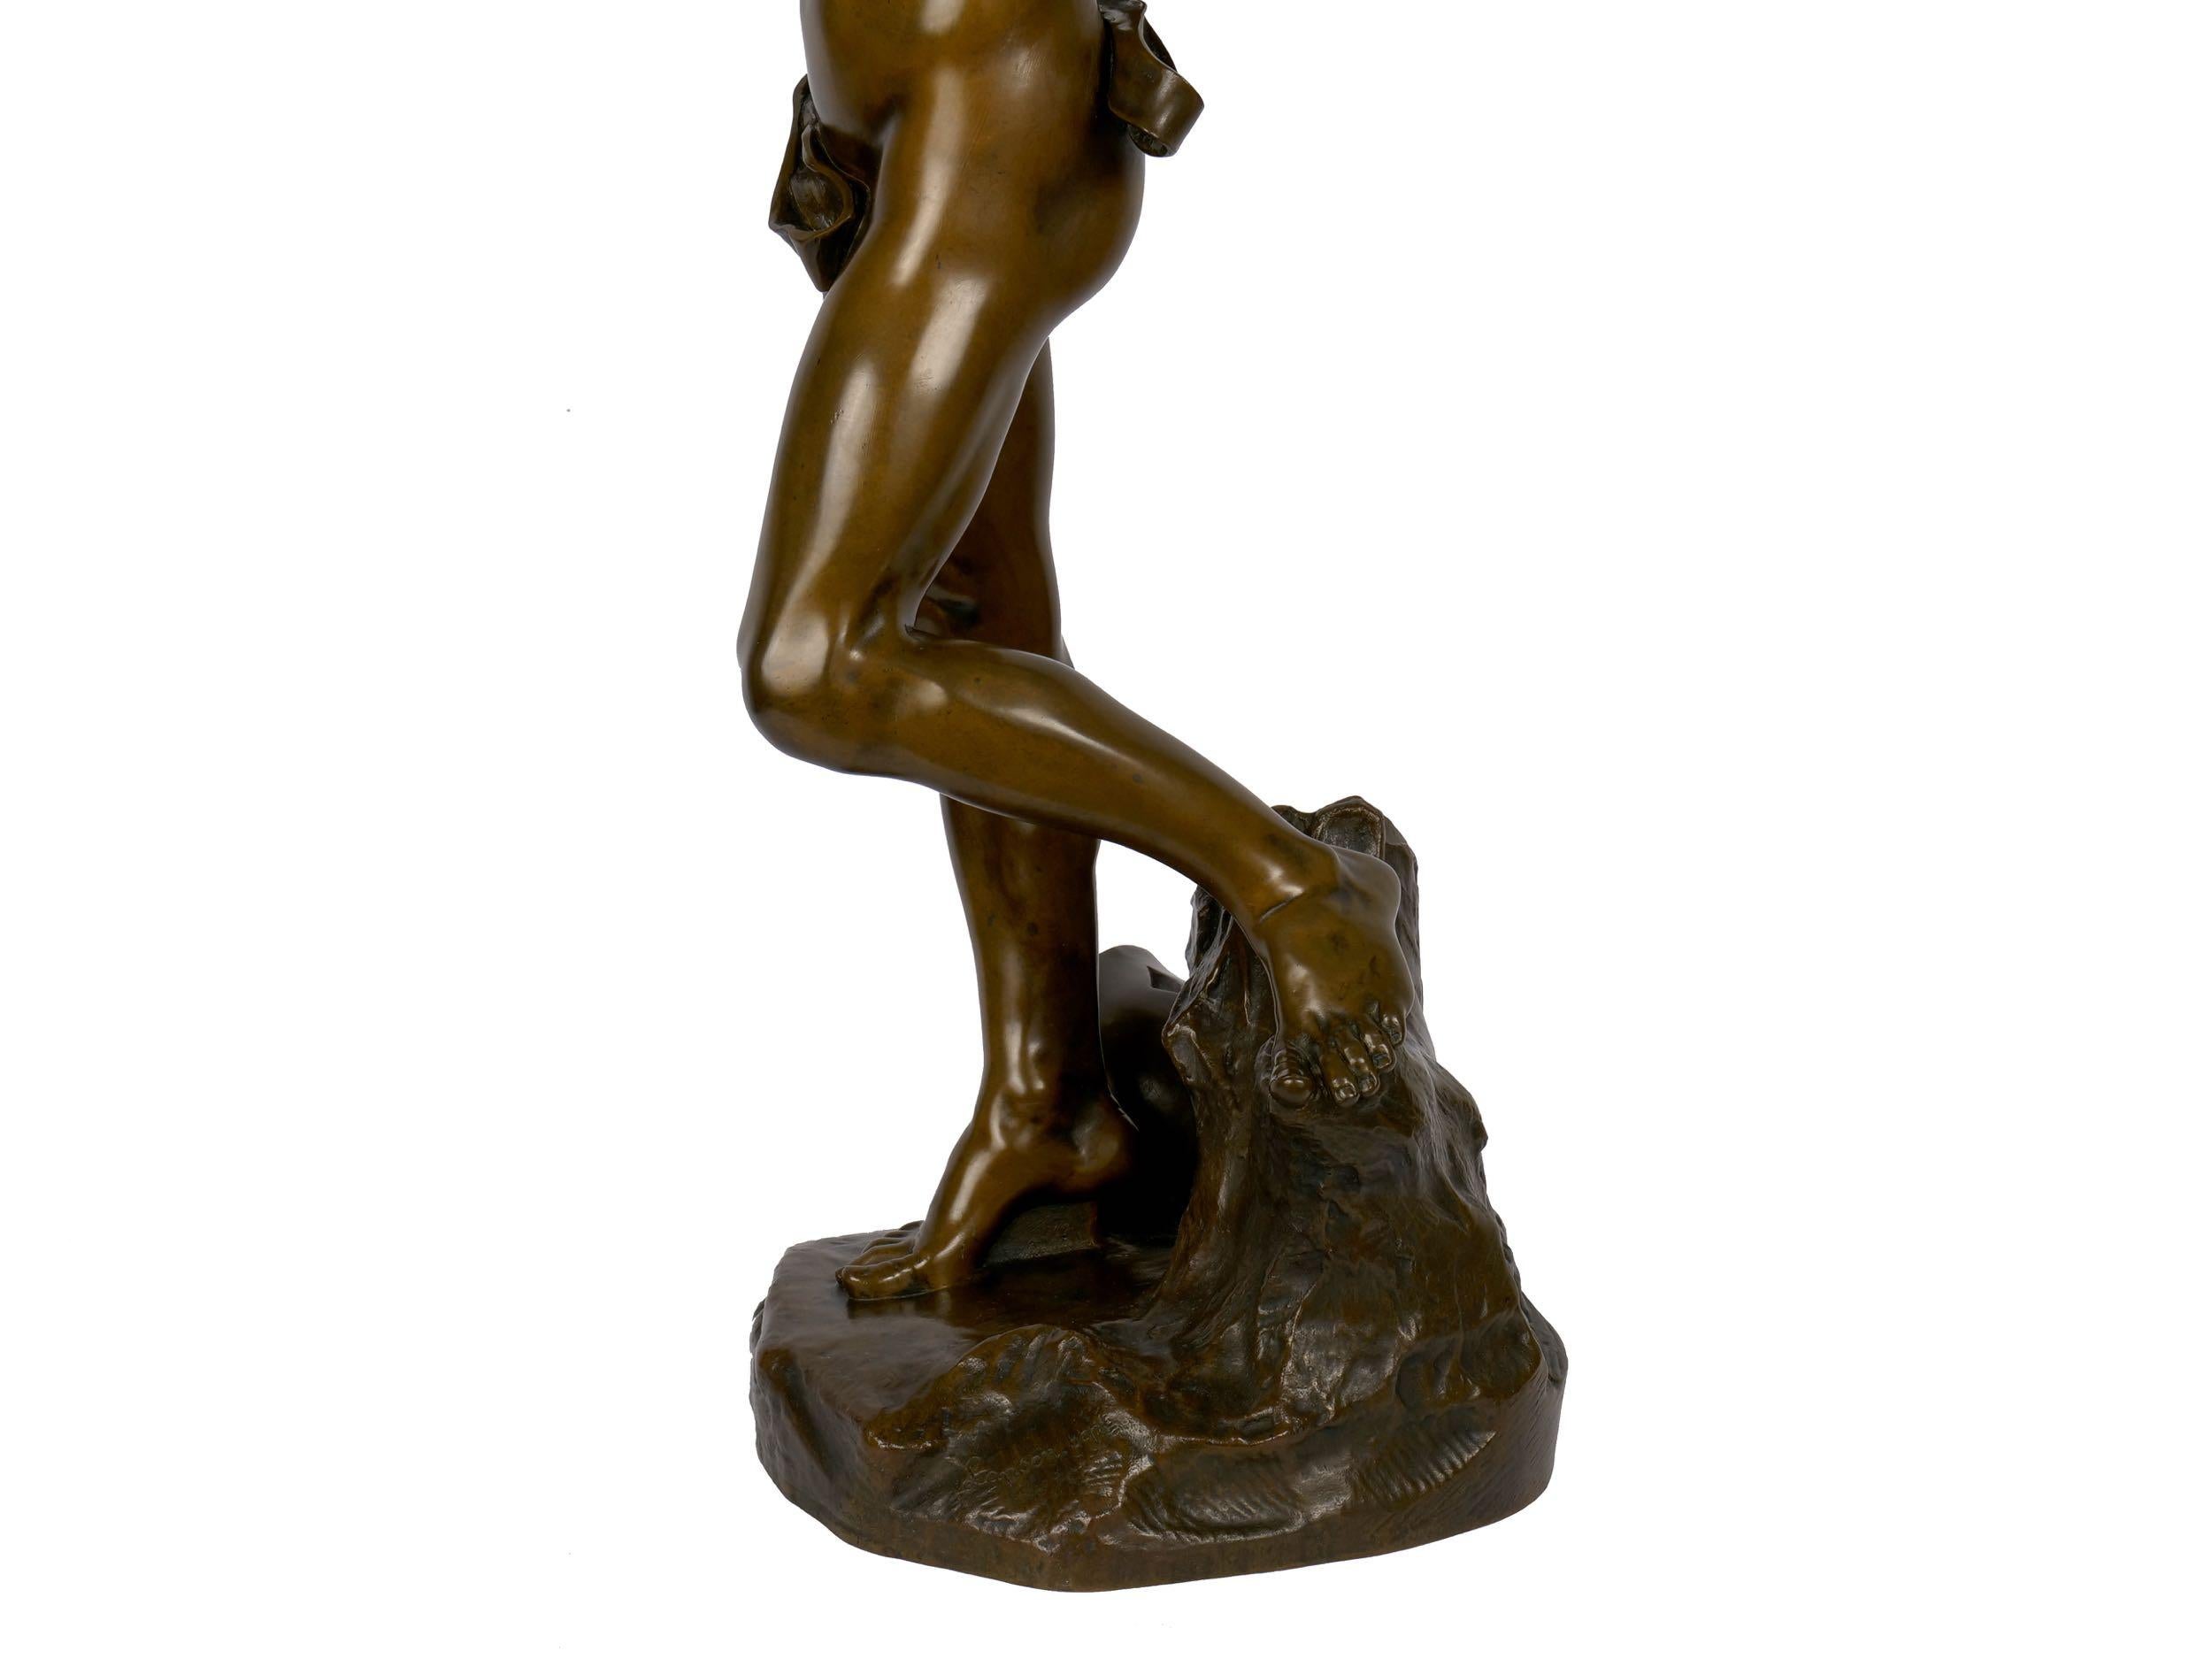 “Jason and the Golden Fleece” '1875' French Bronze Sculpture by Lanson & Susse 7